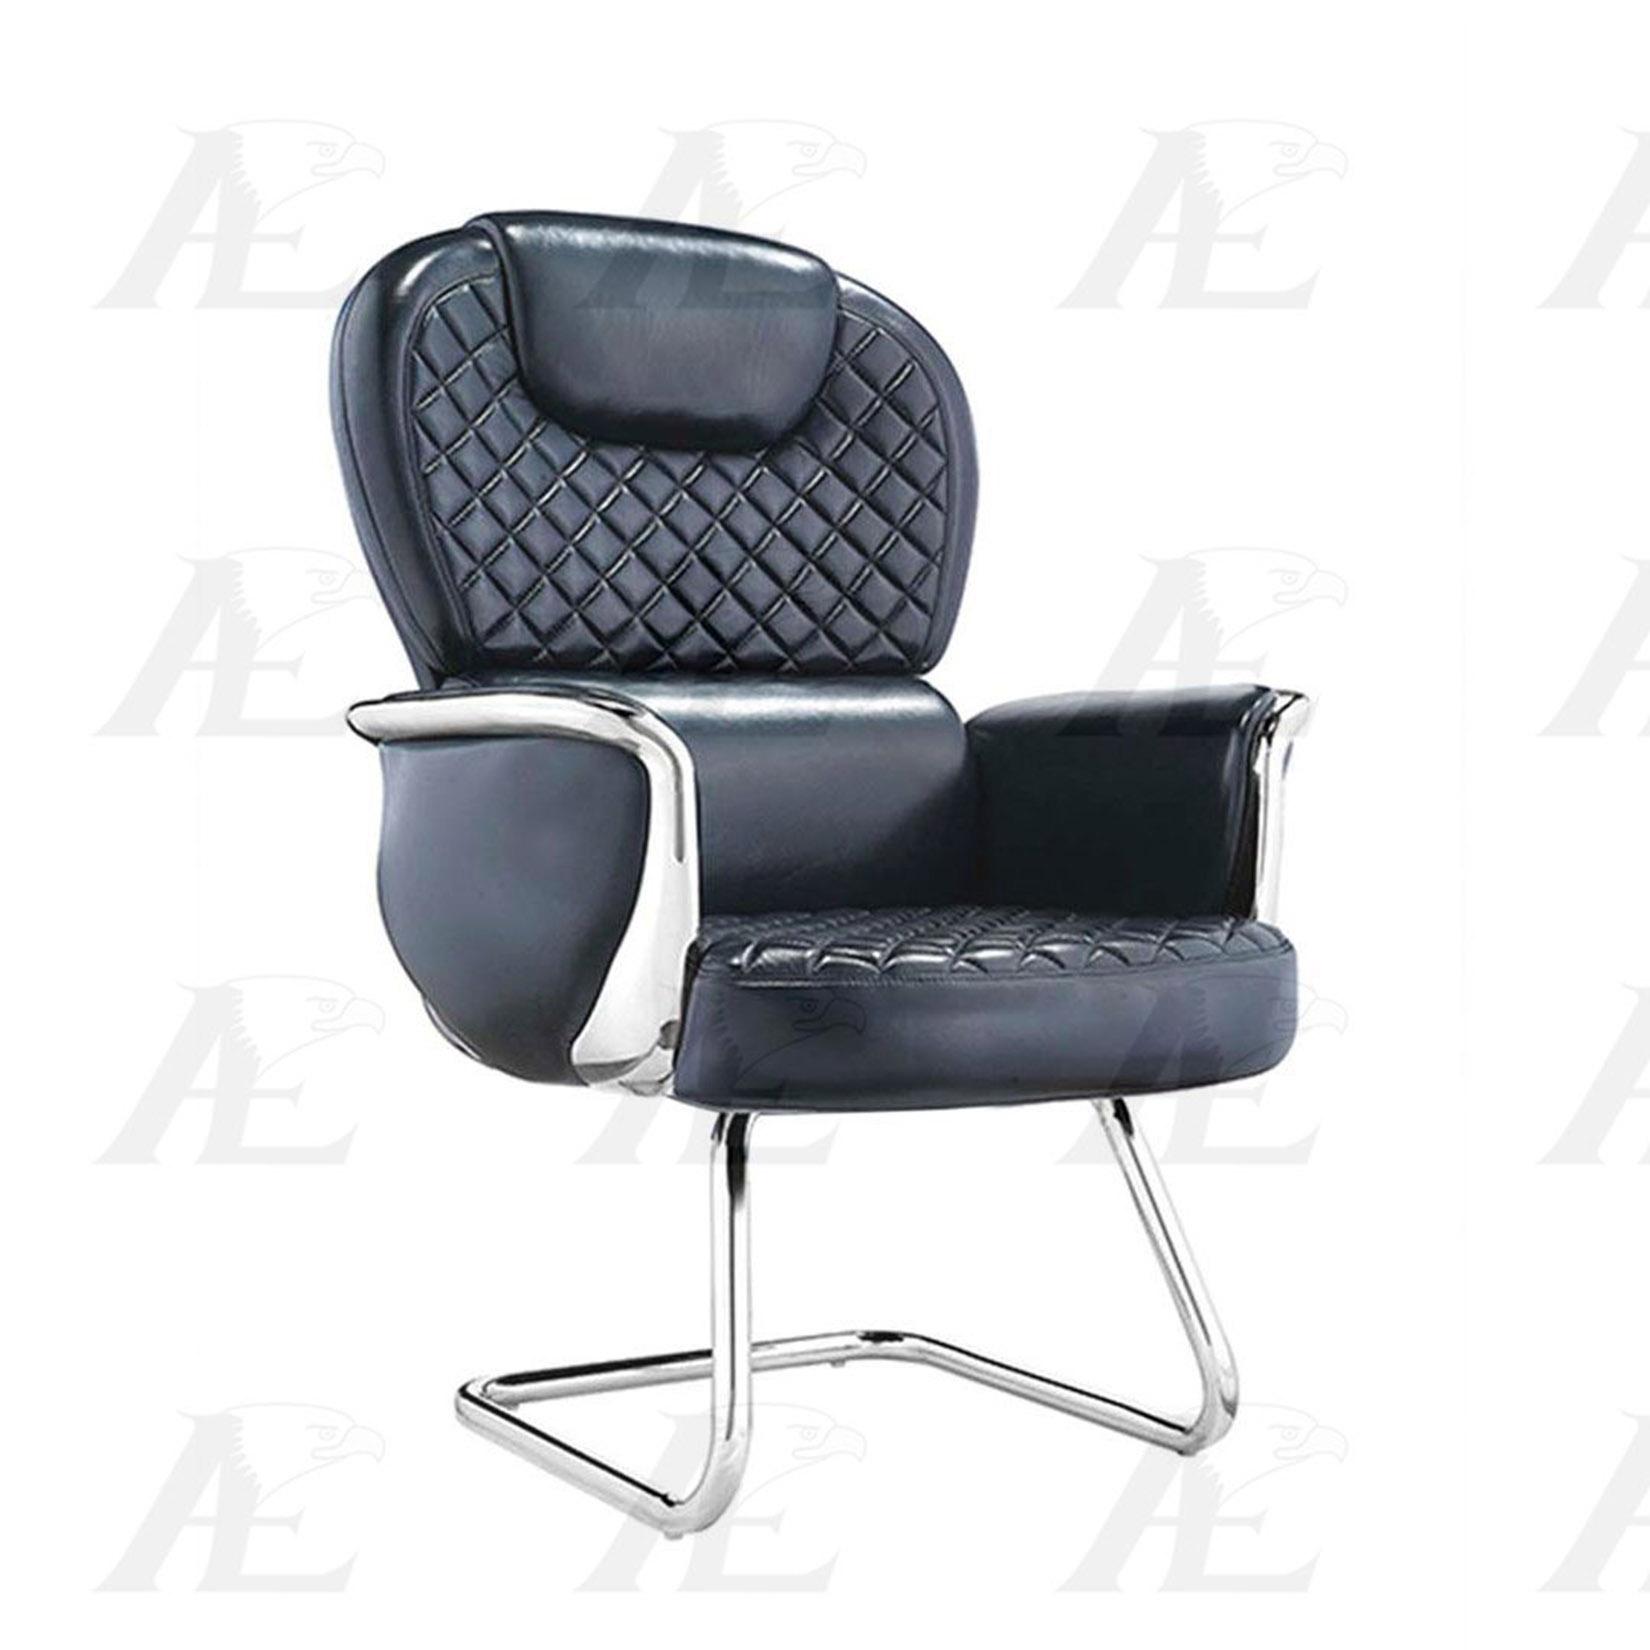 Modern Conference Chair YS1408C YS1408C in Black Italian Leather